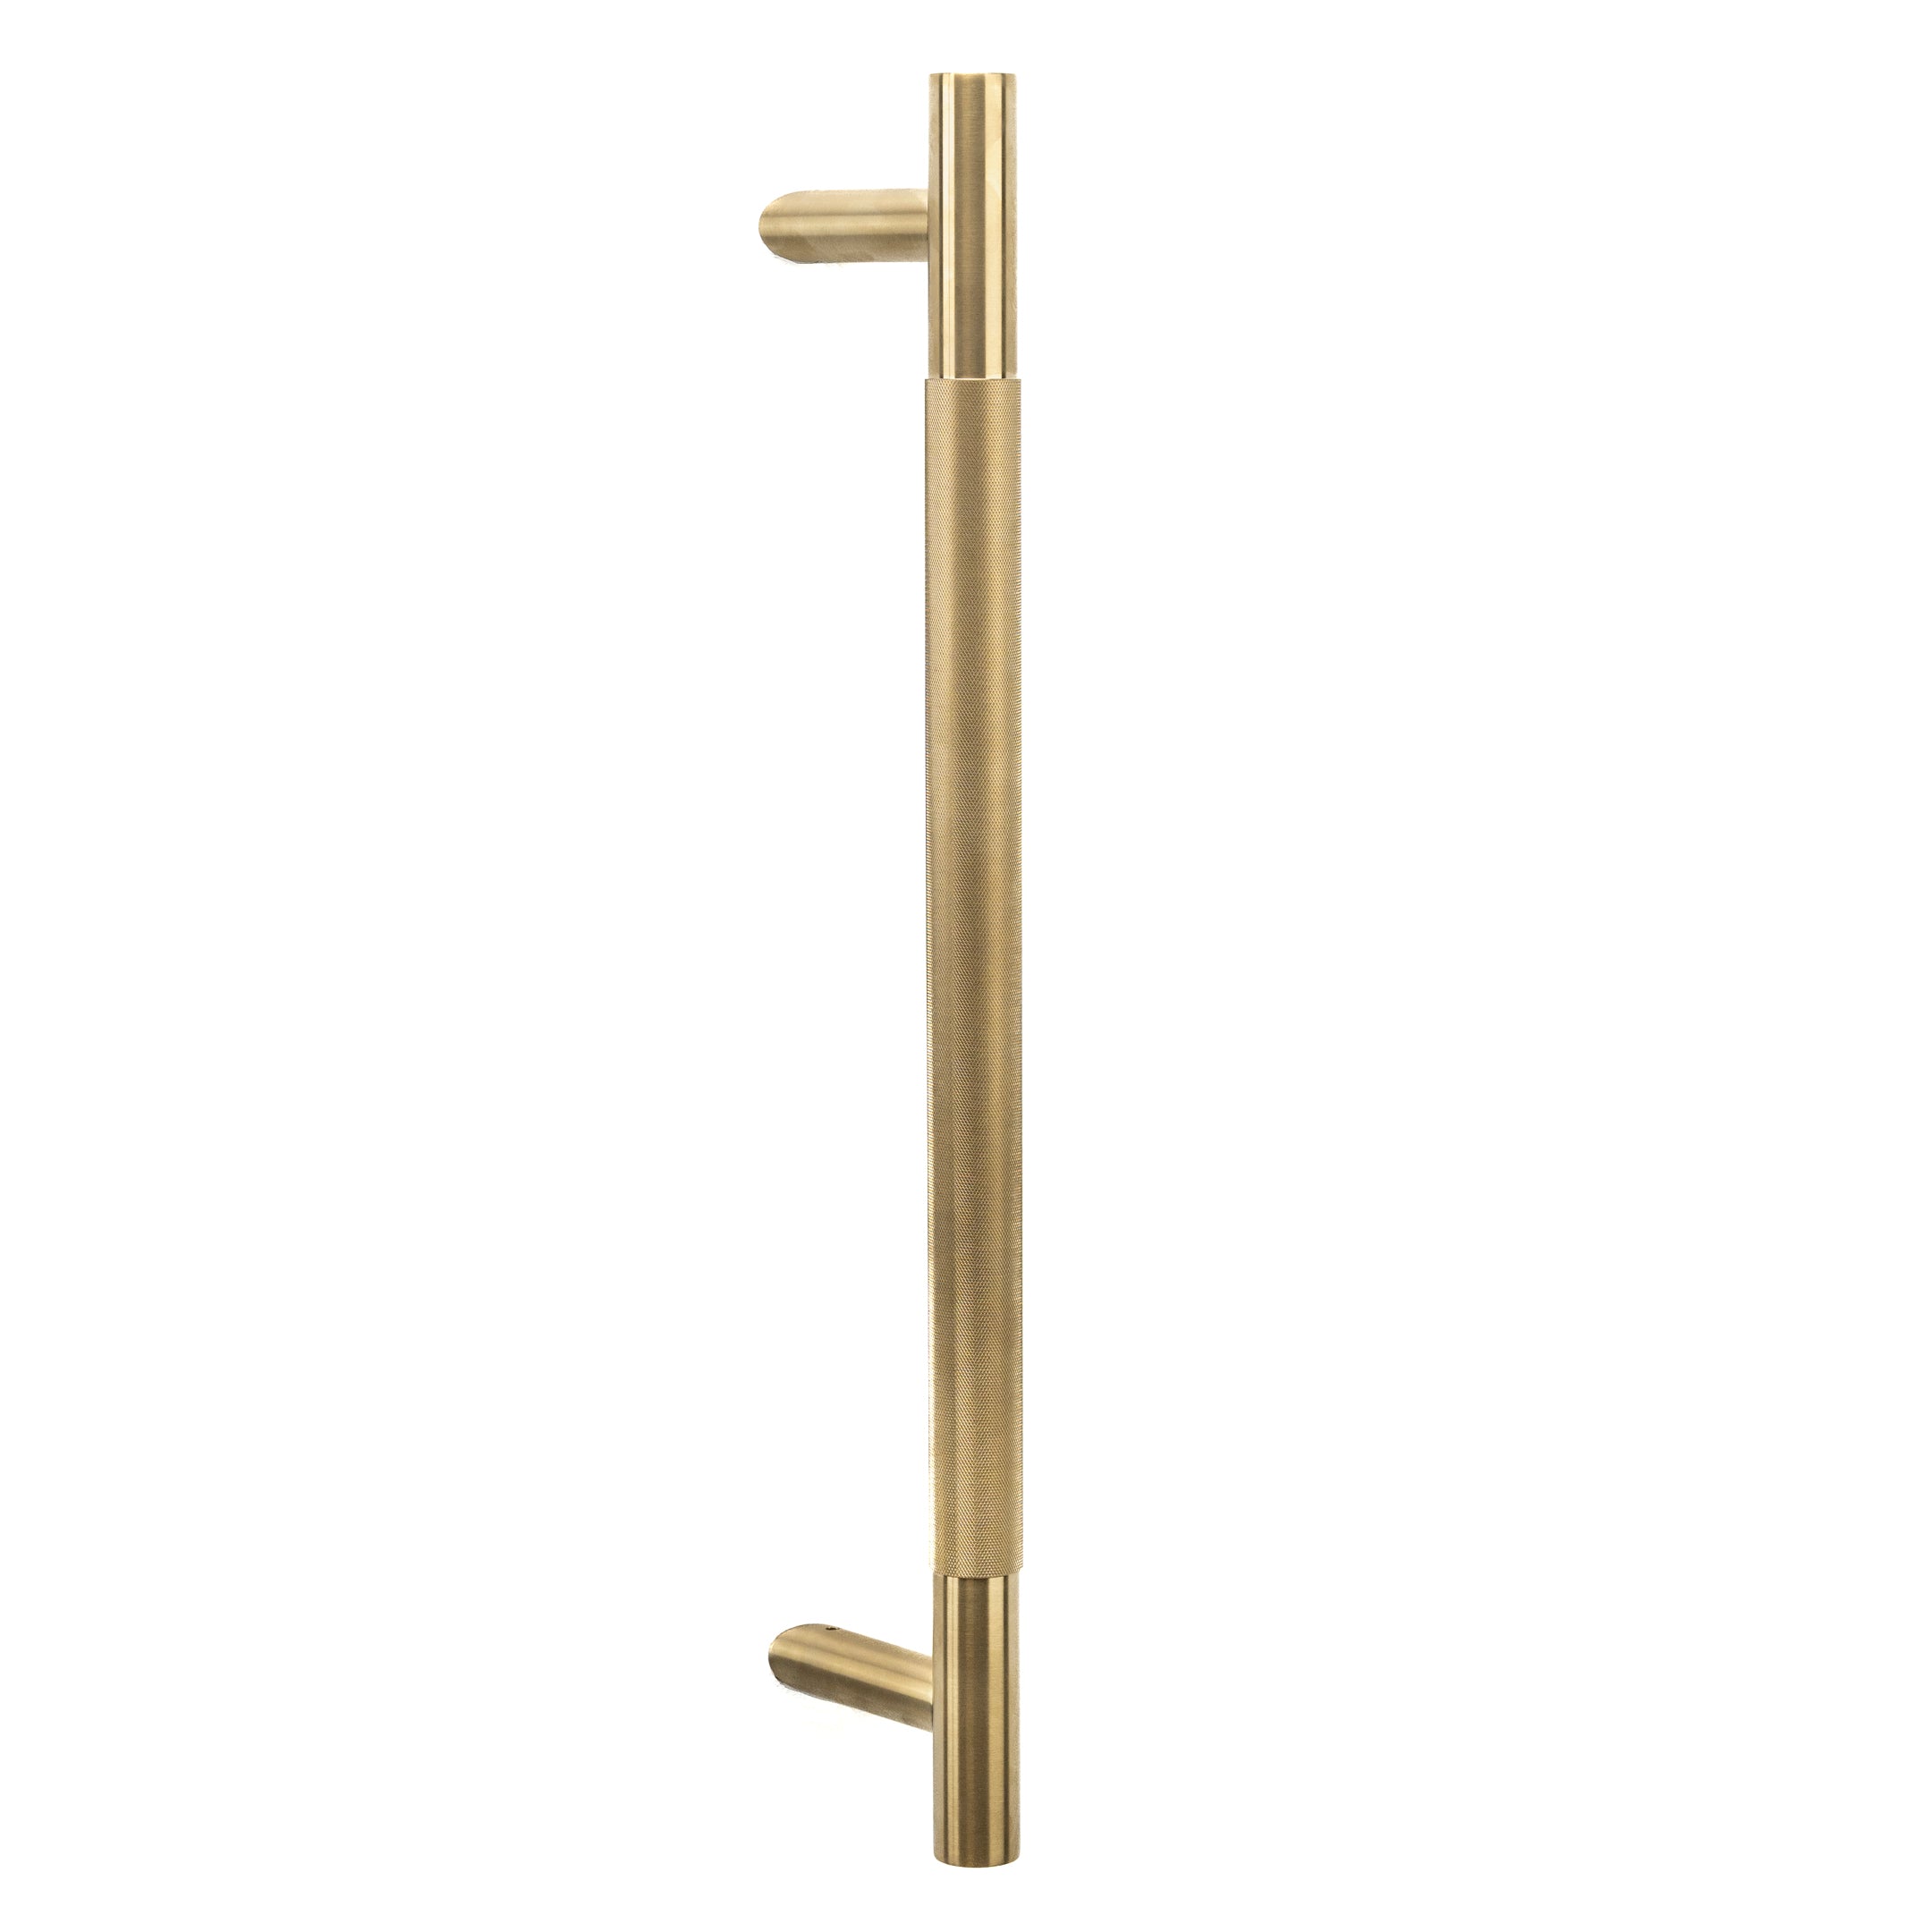 Knurled Offset Pull Handle Satin Brass 600mm